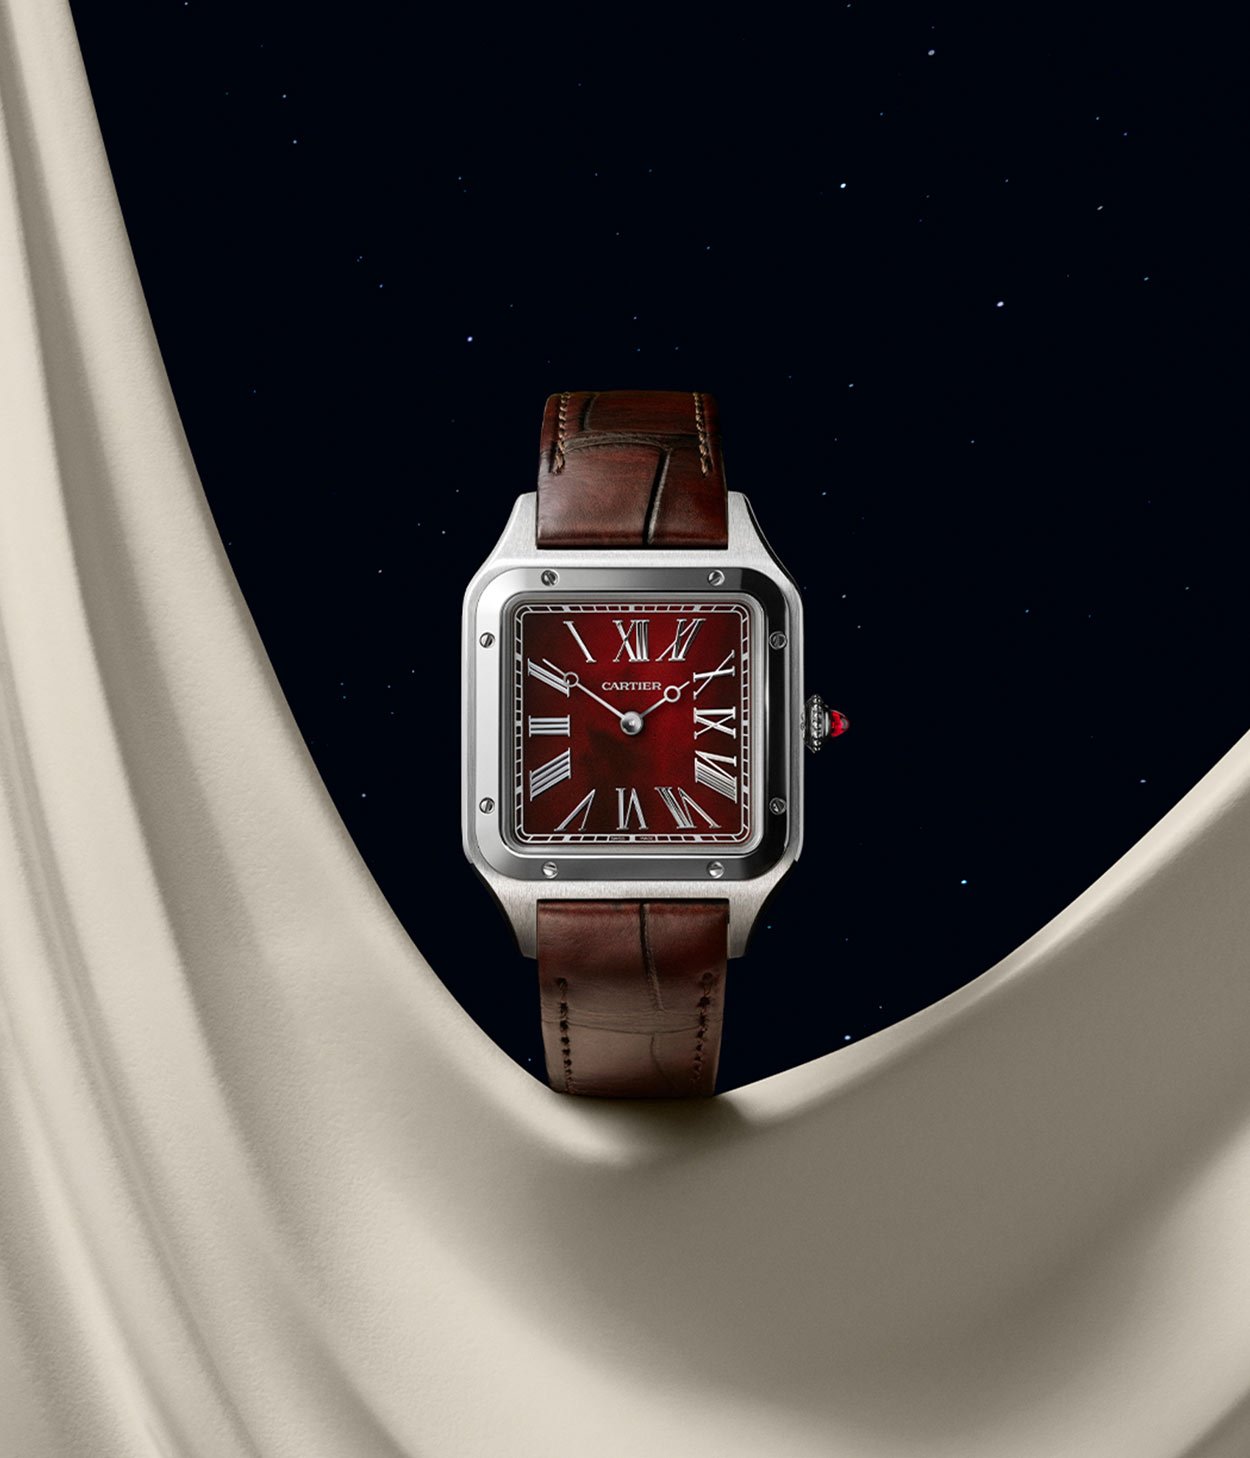 Discovering the New Santos de Cartier and Prive Tortue Models